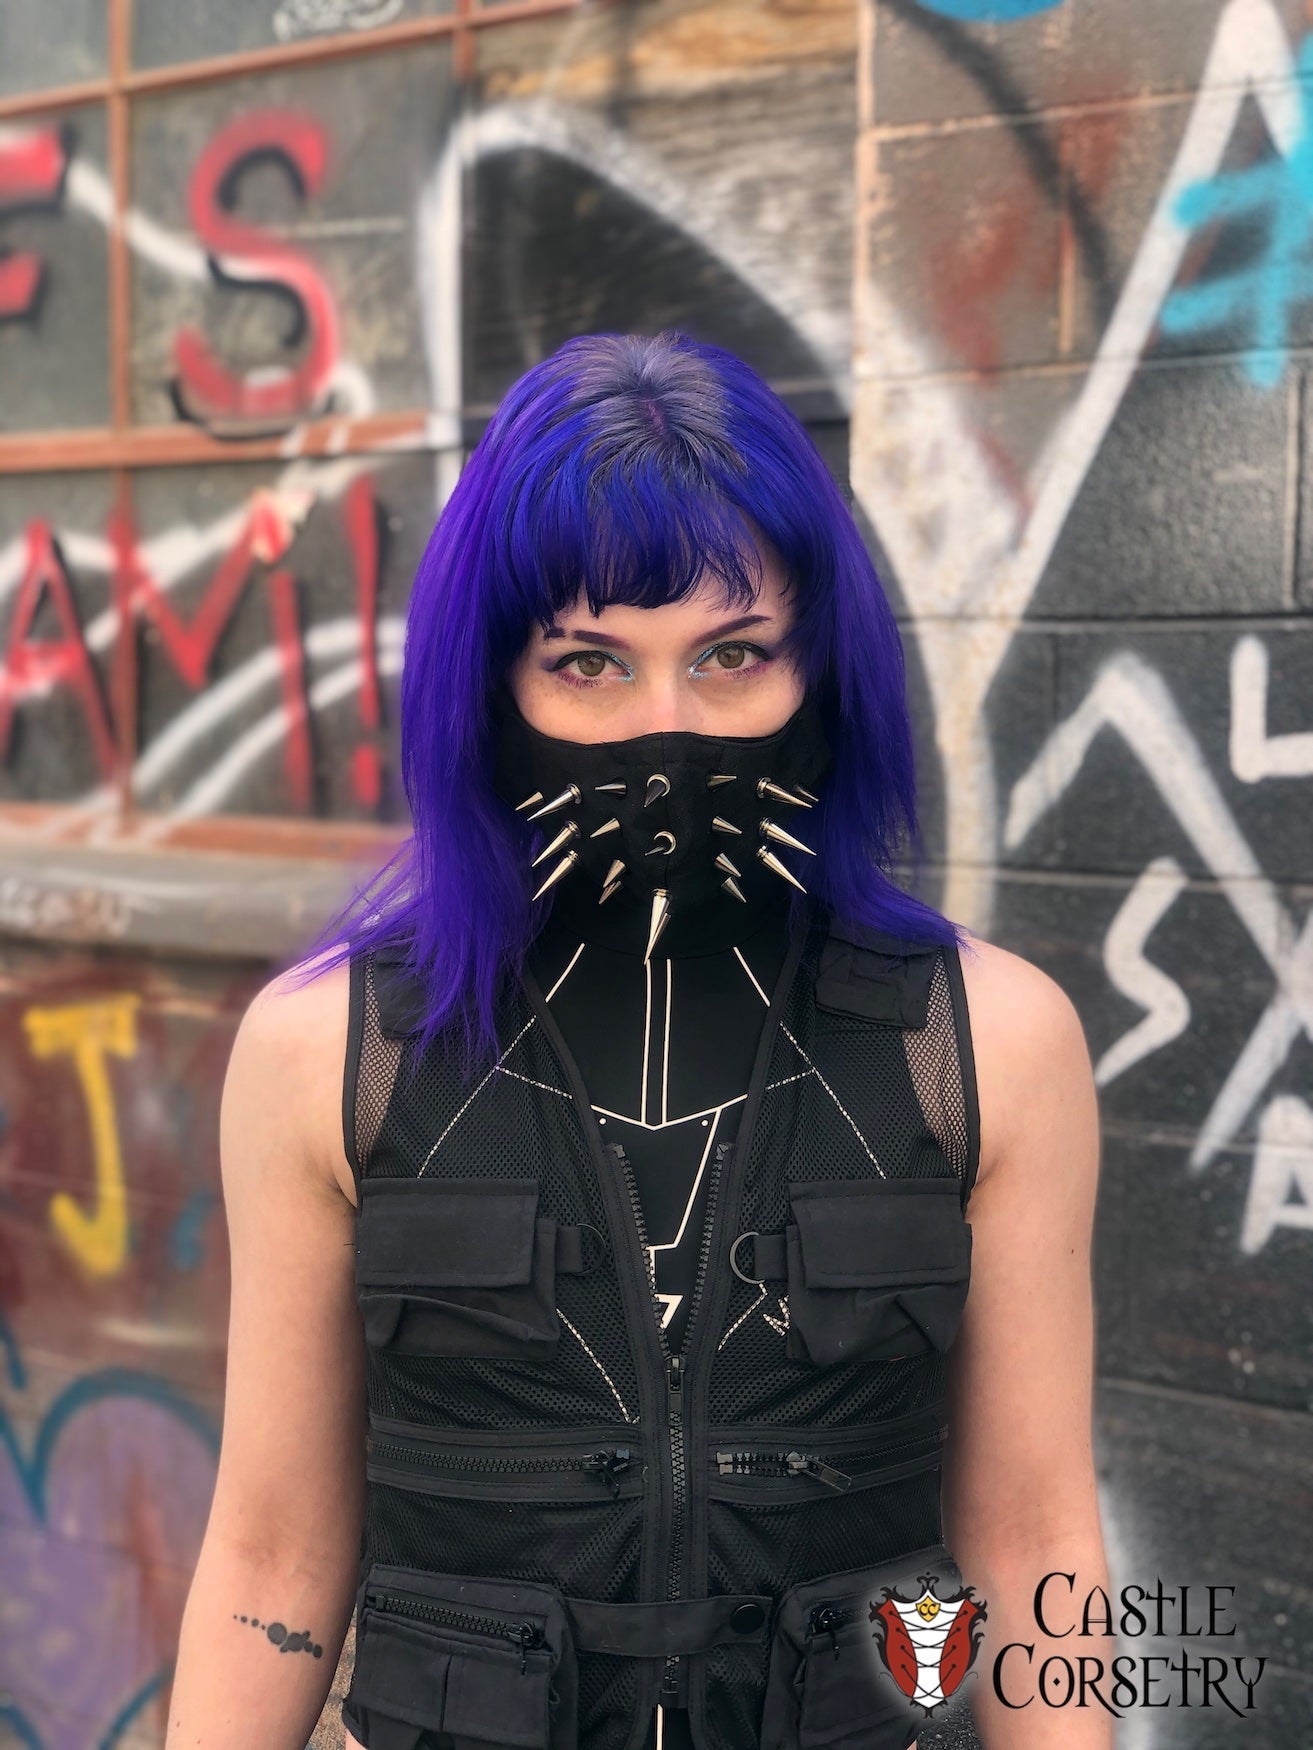 Metal Spiked 'Face Mace' Mask